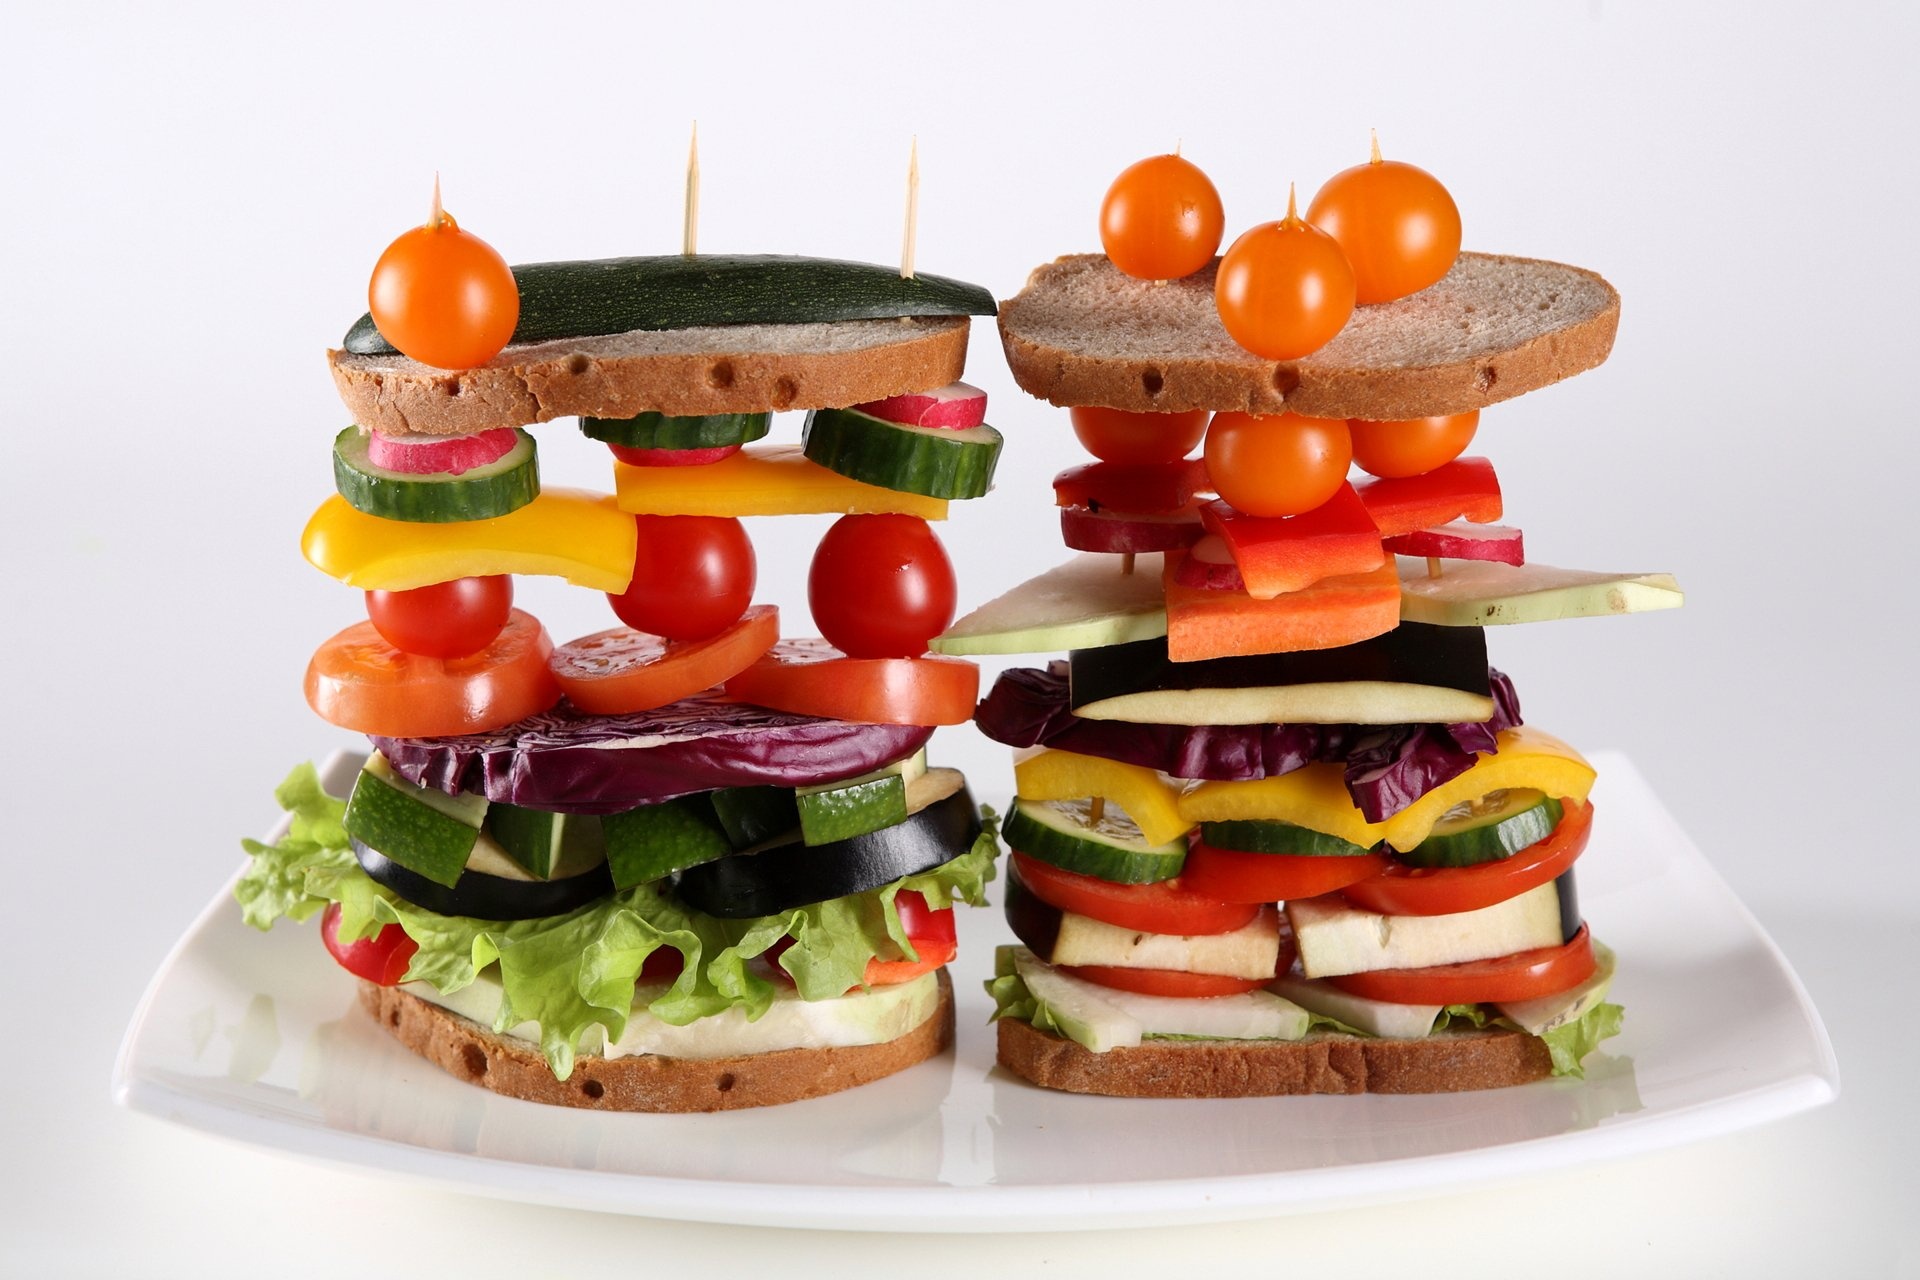 Sandwich: A popular choice for catering events, parties, and buffets. 1920x1280 HD Wallpaper.